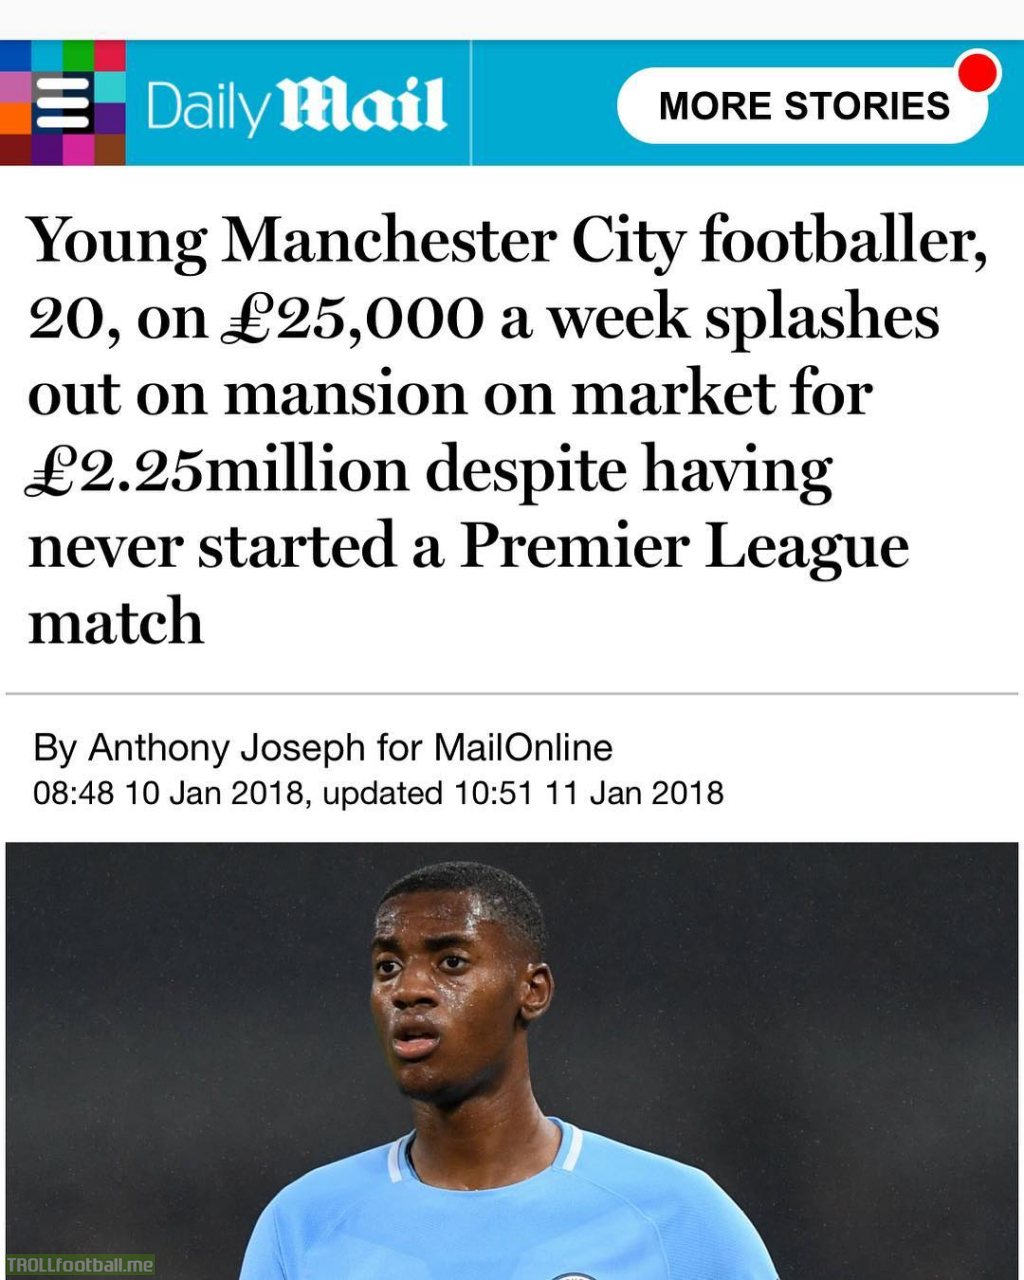 Sterling hits out at Daily Mail and racism